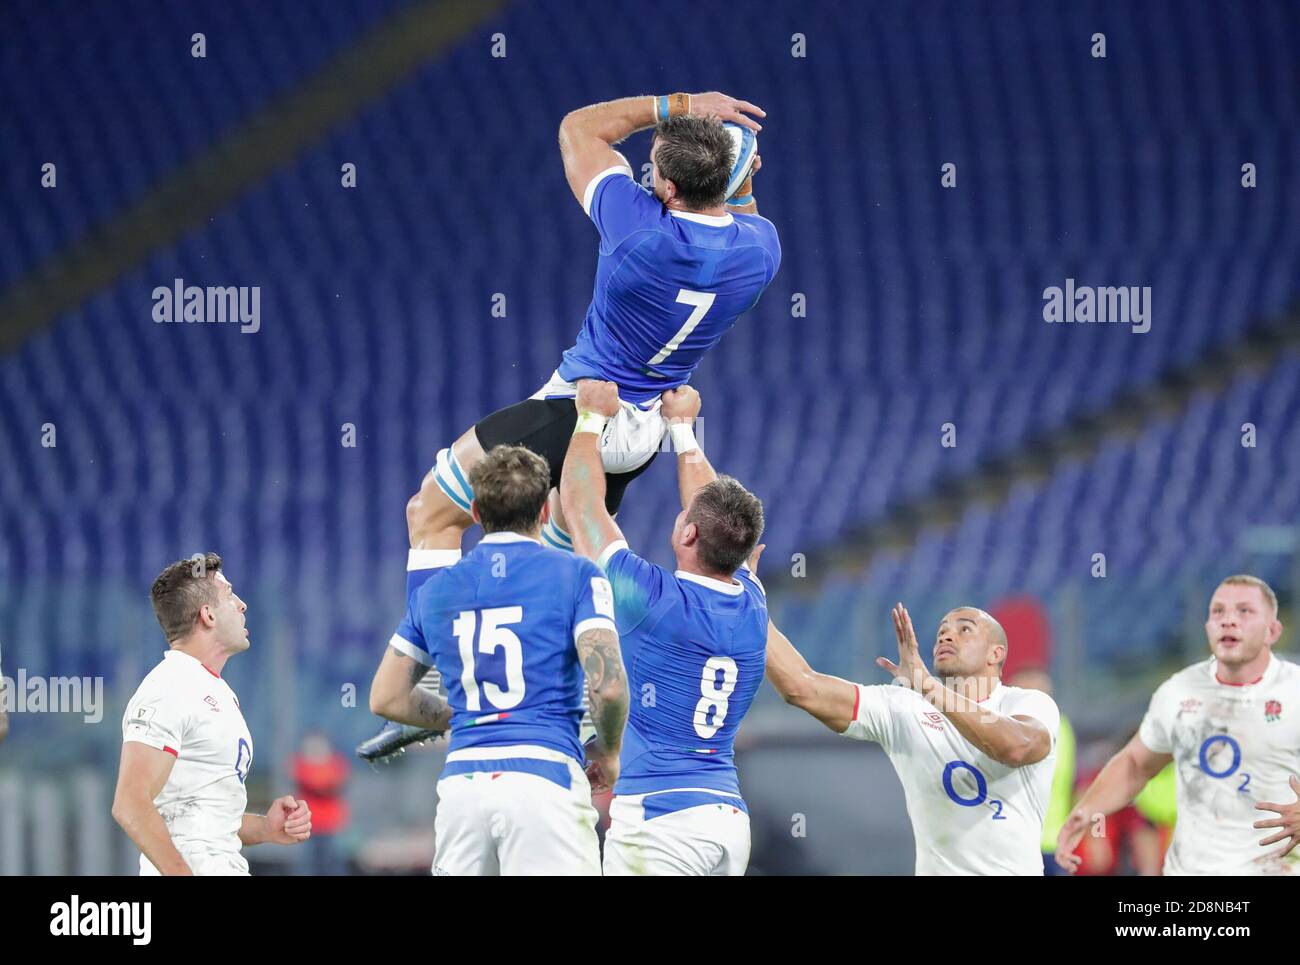 Rome, Italy. 31st Oct, 2020. rome, Italy, Stadio Olimpico, 31 Oct 2020, Braam Steyn (Italy). during Italy vs England - Rugby Six Nations match - Credit: LM/Luigi Mariani Credit: Luigi Mariani/LPS/ZUMA Wire/Alamy Live News Stock Photo